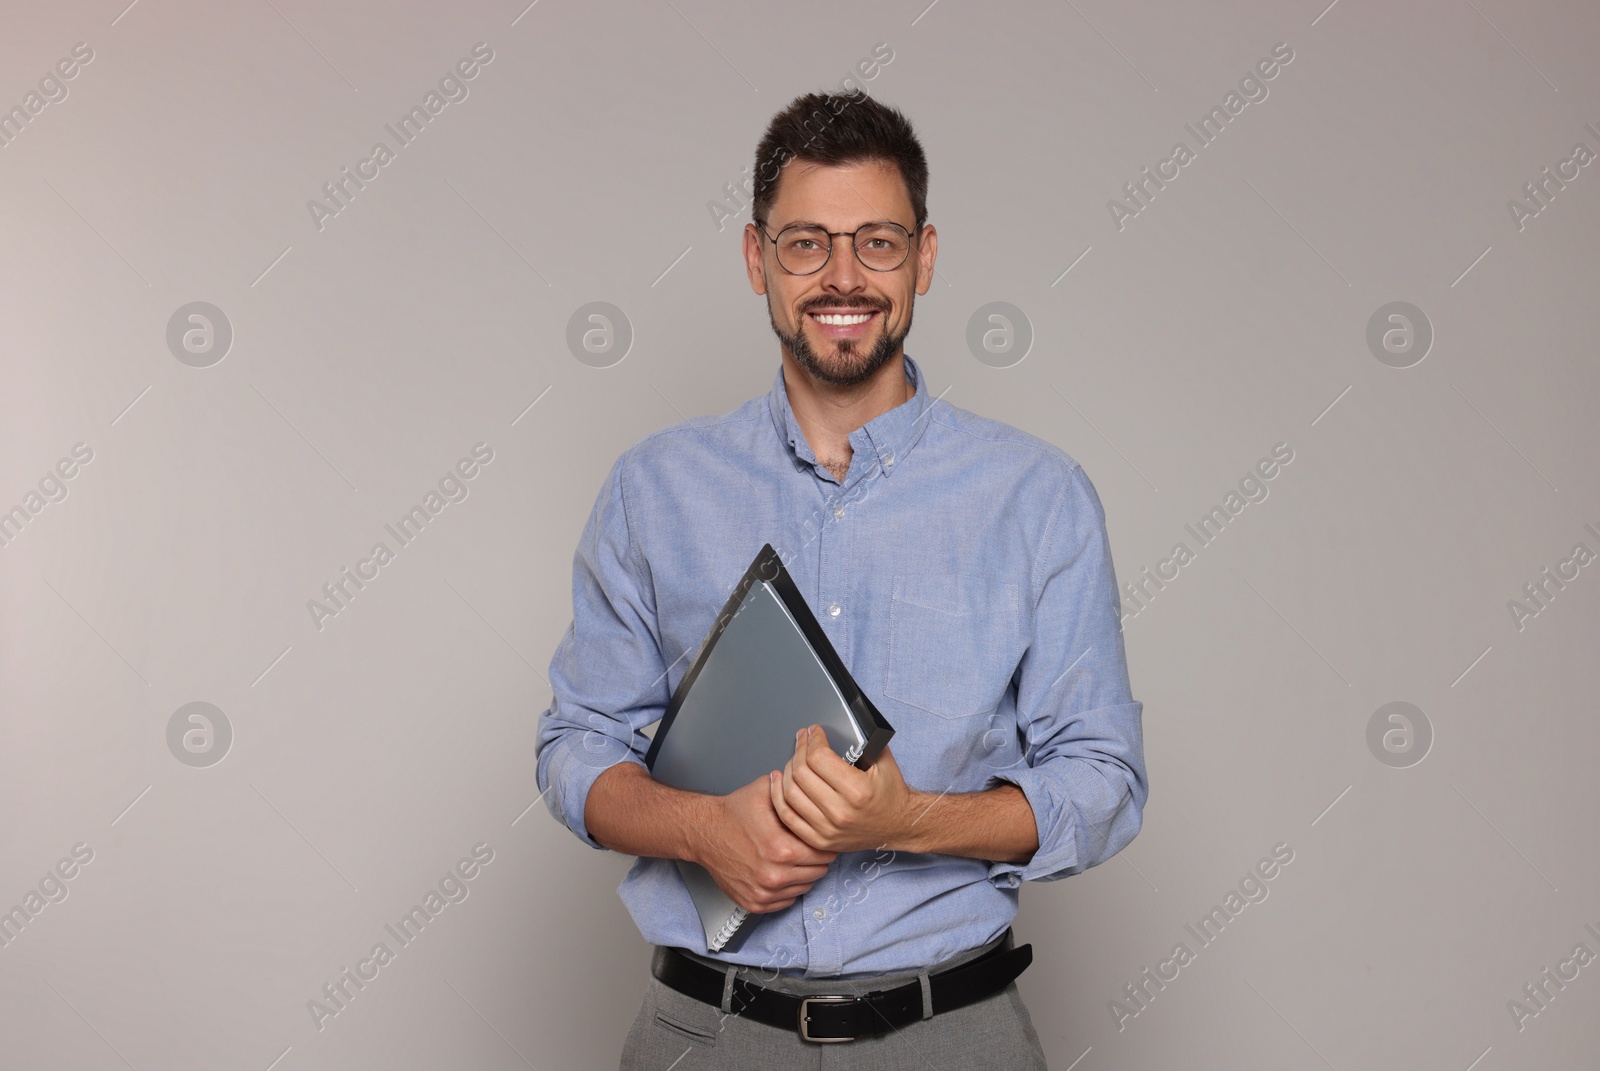 Photo of Happy teacher with glasses and stationery against beige background